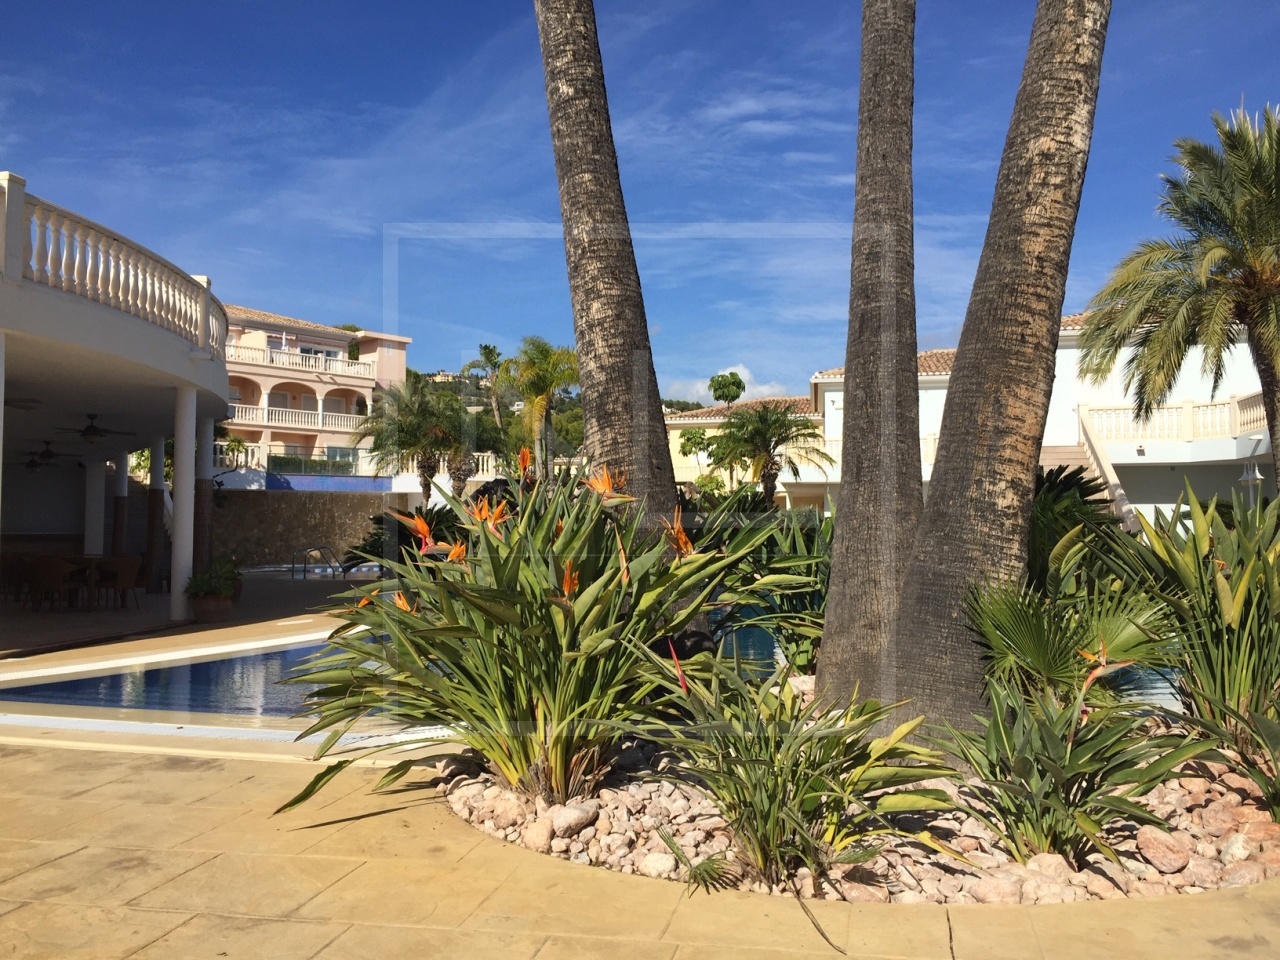 2 bedroom 2 bathroom Managed Complex Apartment For Sale in Benissa Costa